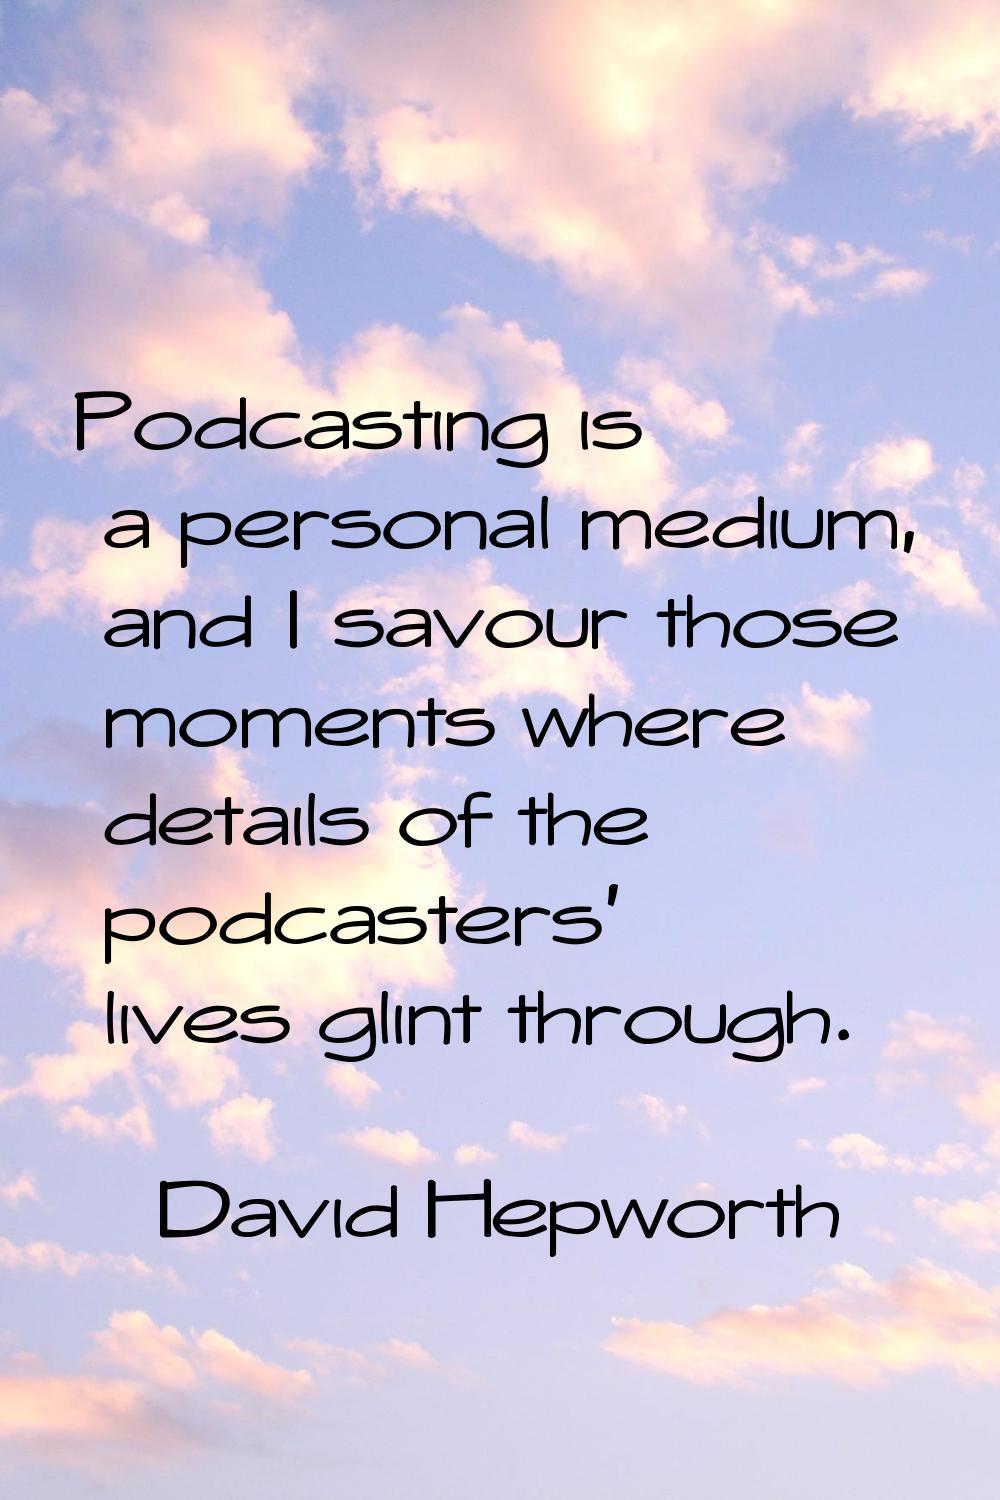 Podcasting is a personal medium, and I savour those moments where details of the podcasters' lives 